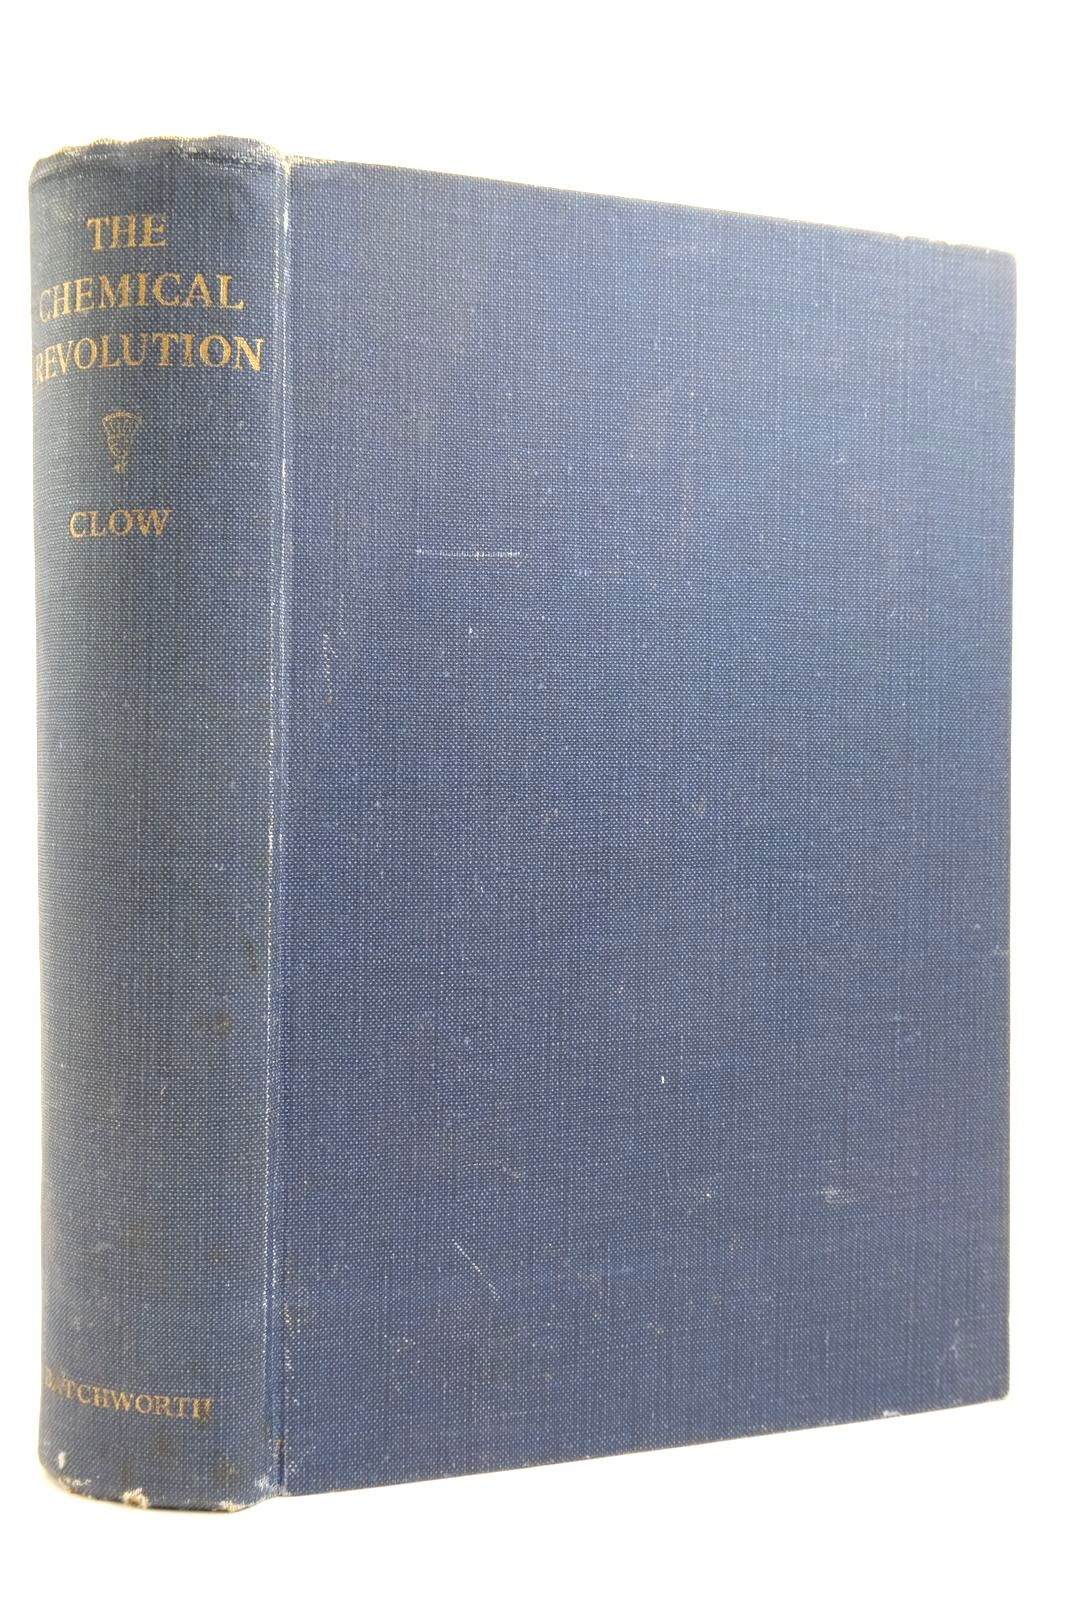 Photo of THE CHEMICAL REVOLUTION: A CONTRIBUTION TO SOCIAL TECHNOLOGY written by Clow, Archibald Clow, Nan L. published by The Batchworth Press (STOCK CODE: 2135960)  for sale by Stella & Rose's Books